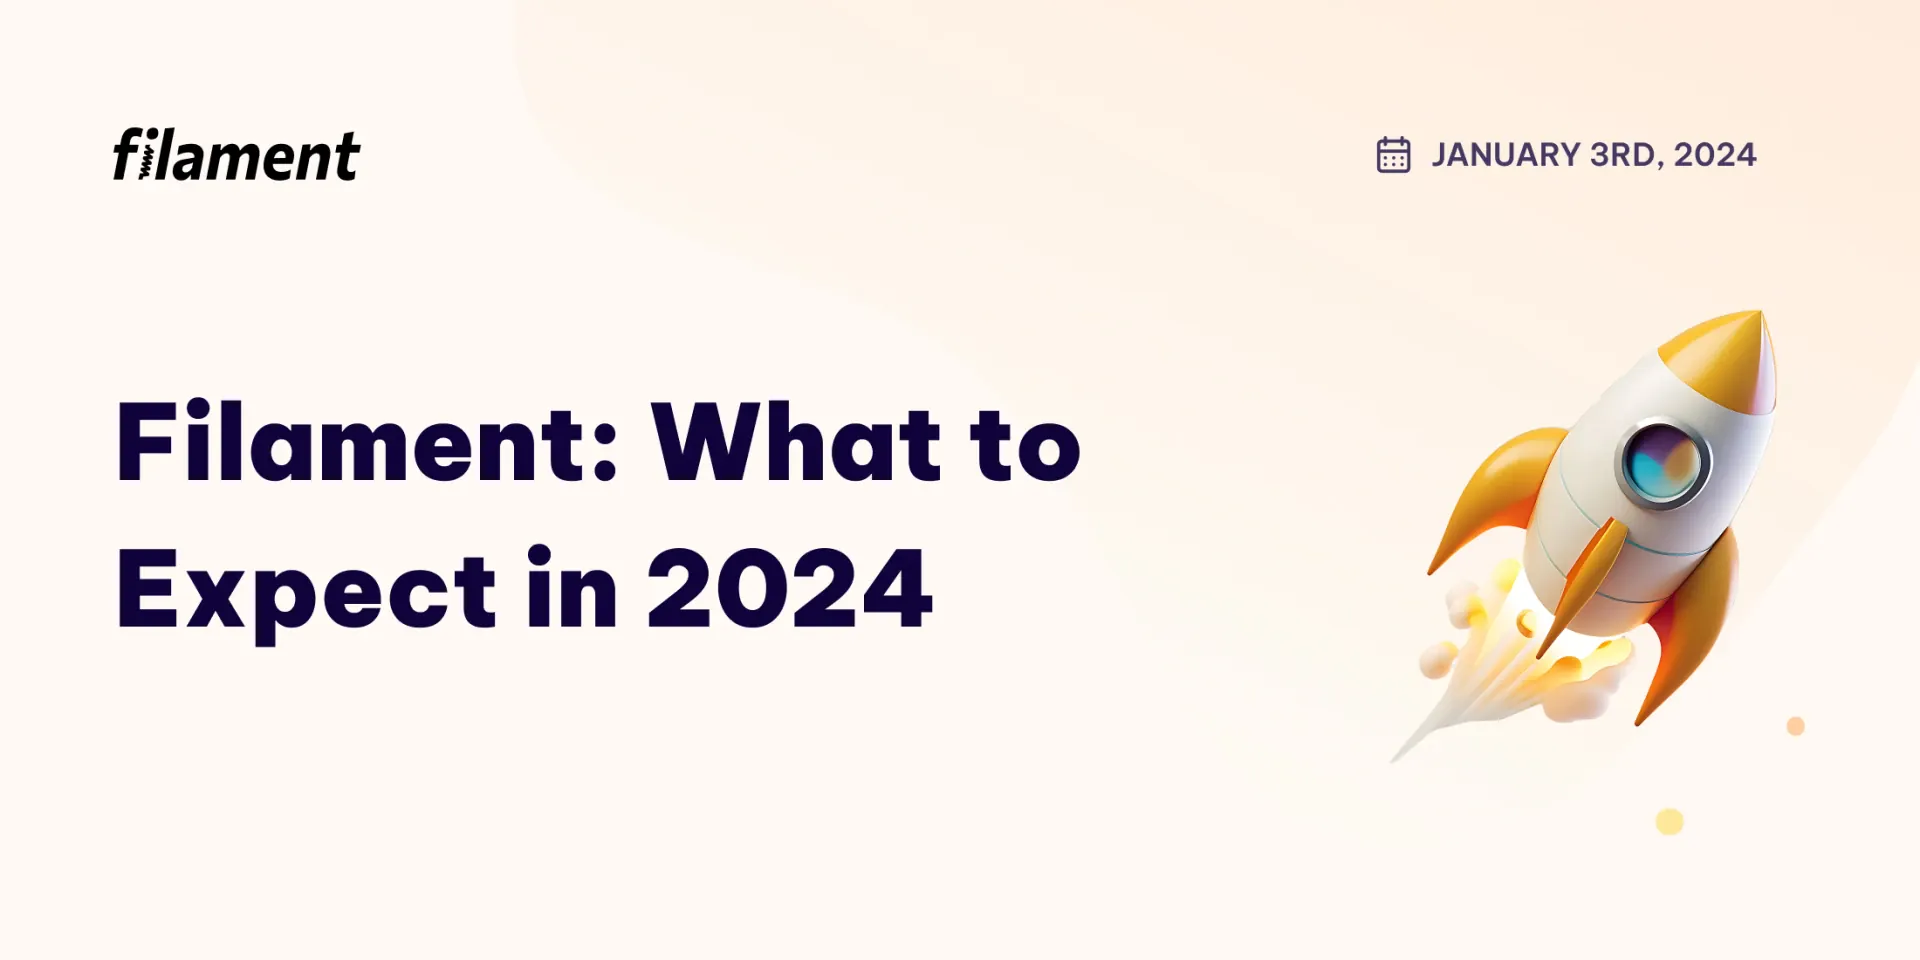 Filament: What to Expect in 2024 Banner Image